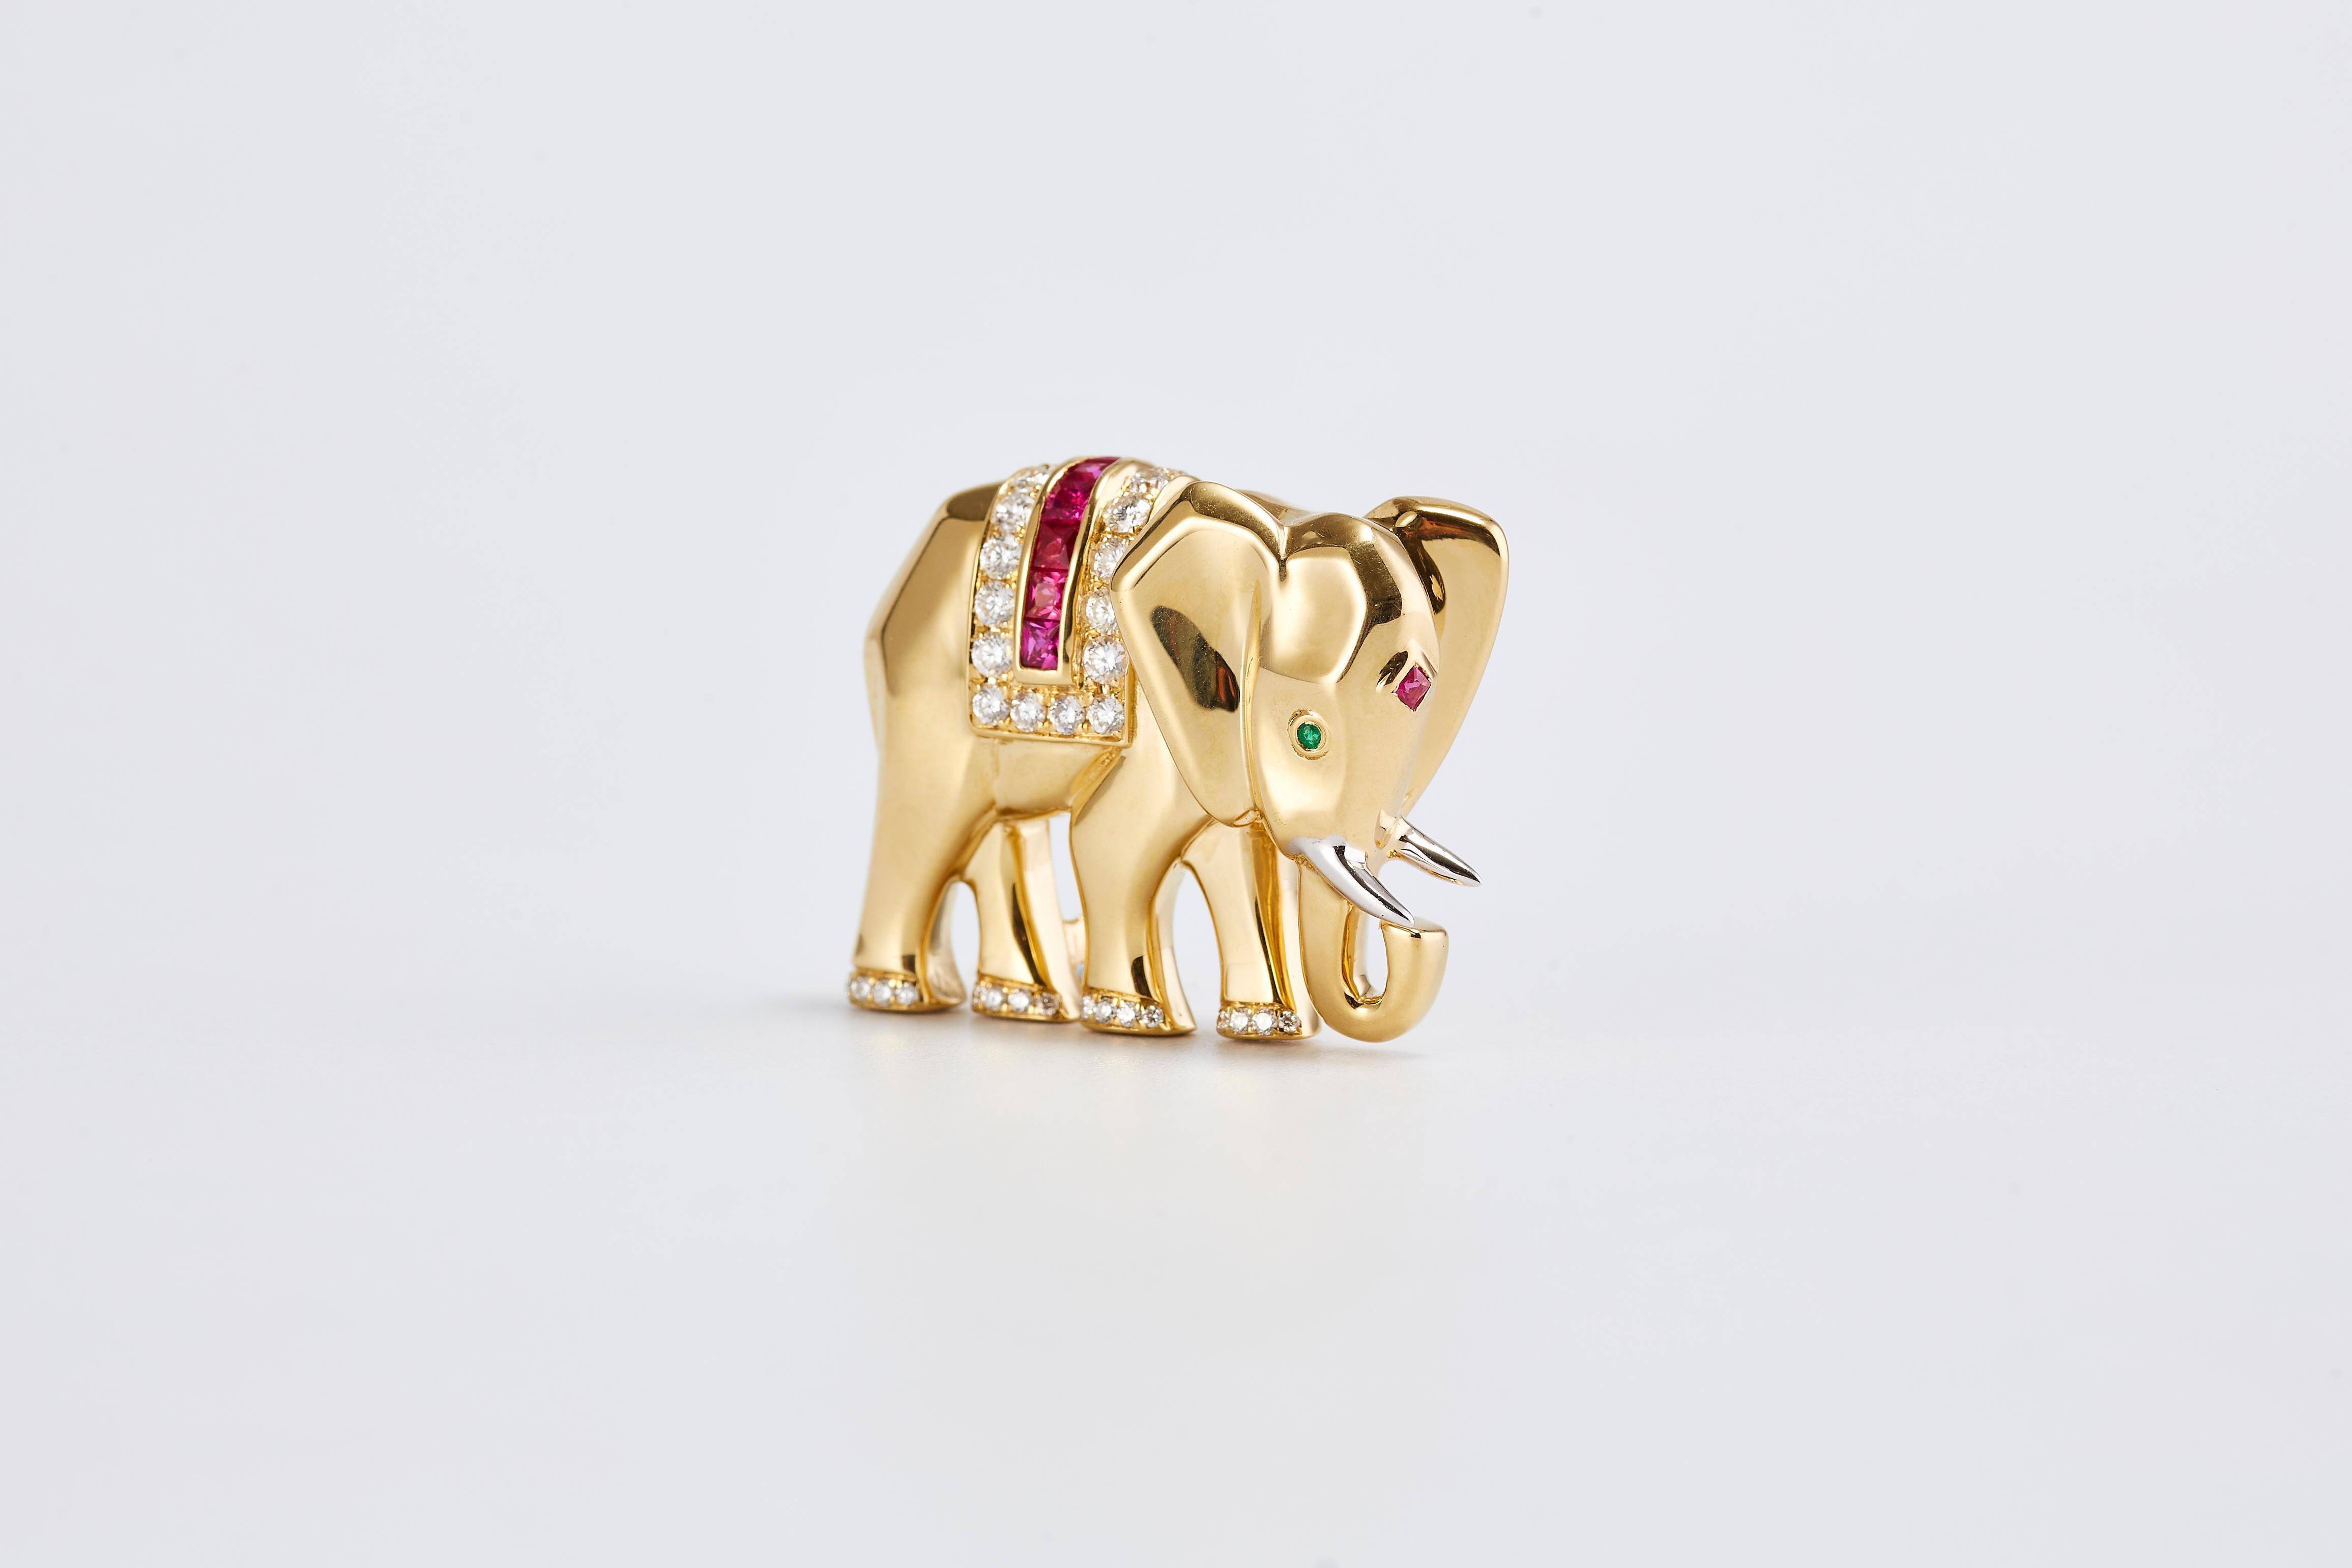 A vintage Cartier elephant pin/brooch in 18-karat yellow gold, with circular-cut emerald eye, and a ruby mark on the forehead.  Diamonds and ruby in the center of the pin and diamonds decorating the feet.
Circa 1990s. 
Total weight: 20.65 gr
